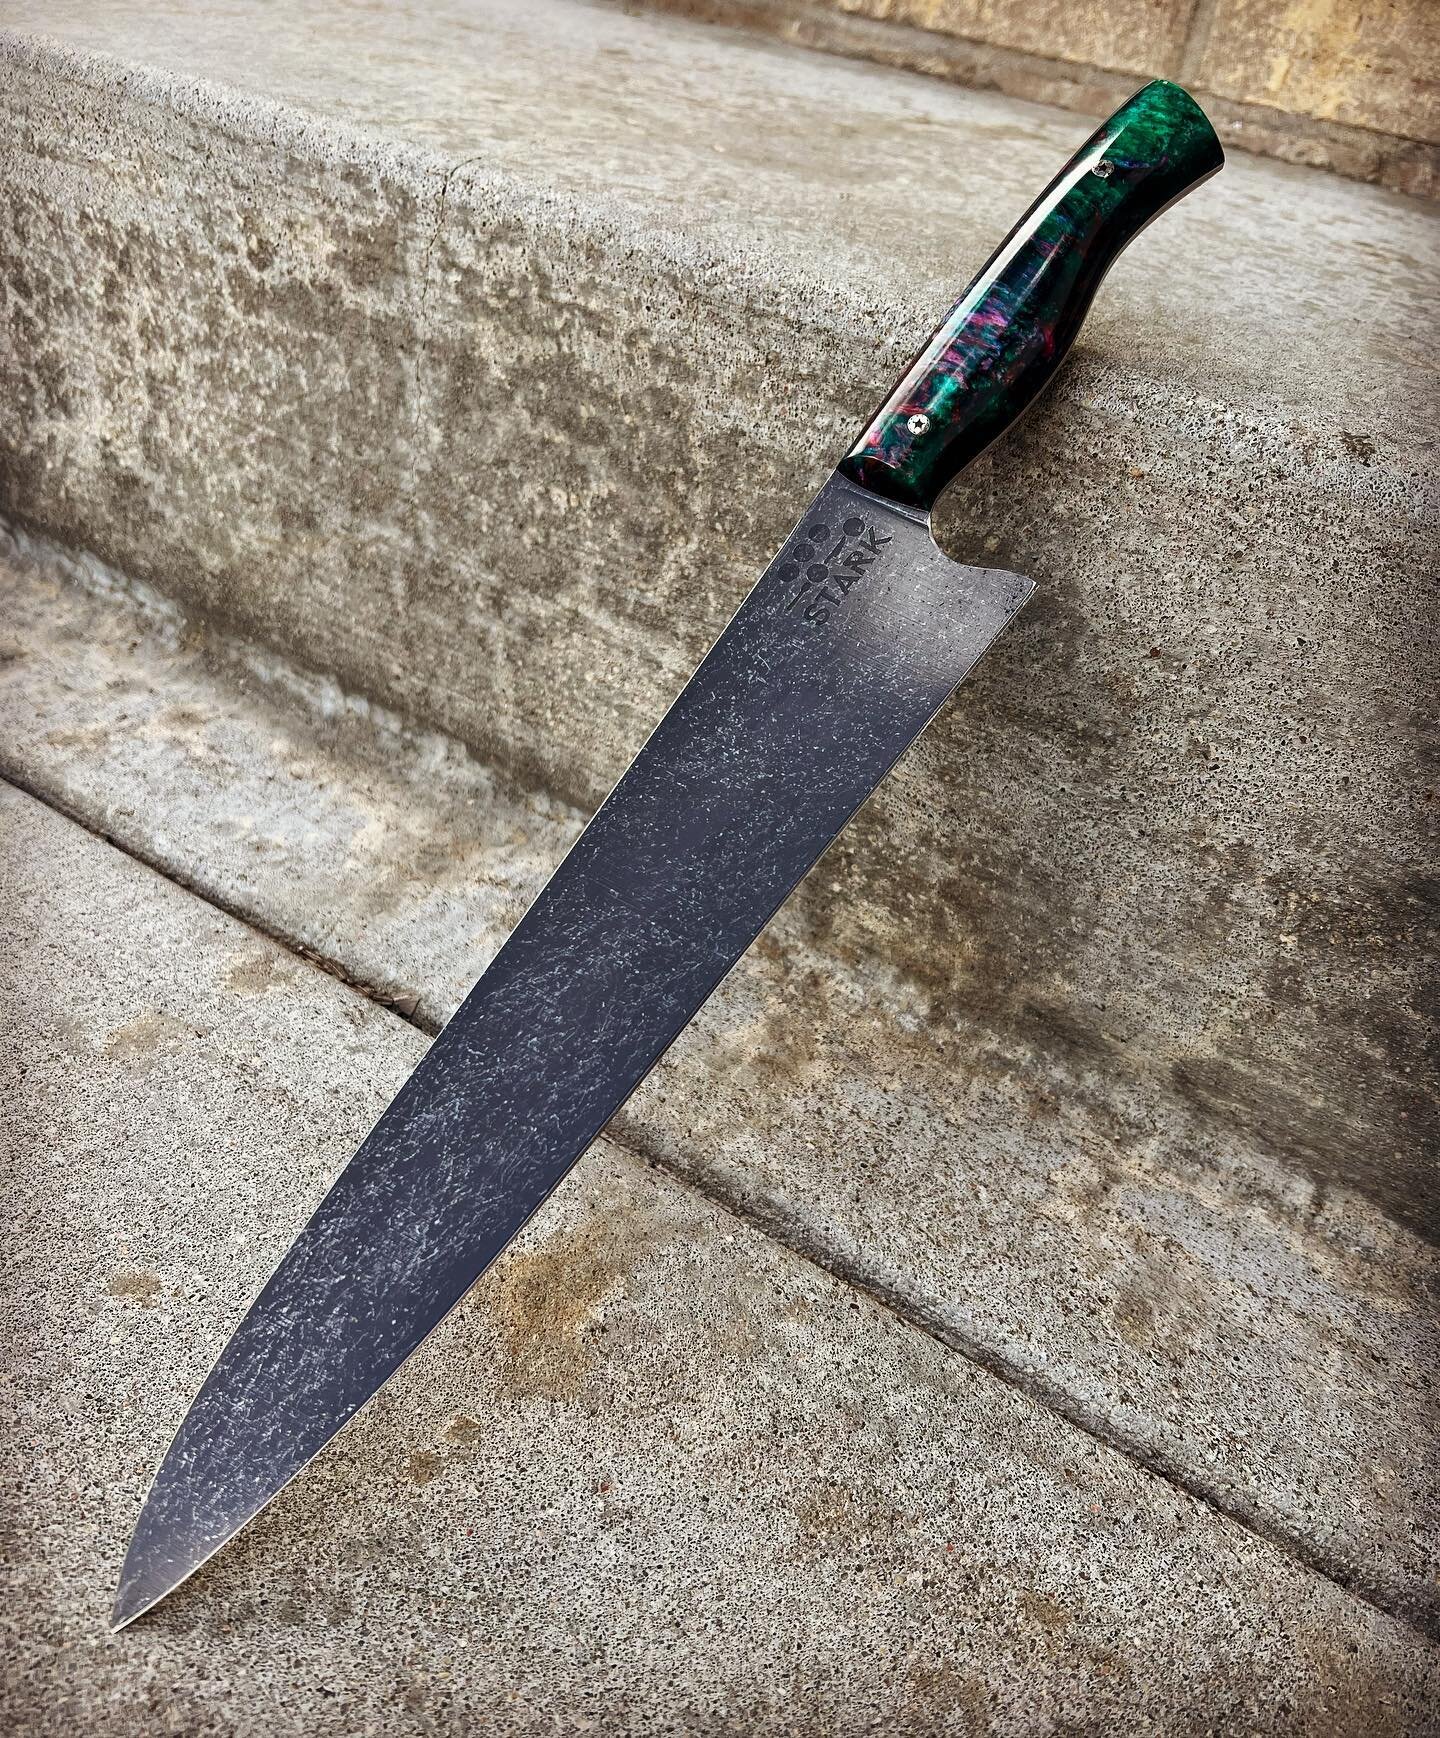 Now this is a knife! Epic slicing knife that is part of a gorgeous kitchen set we just finished for a custom order. Excited to show you all the rest of it soon!
&mdash;&mdash;&mdash;
#customknife #customknives #knifemaker #knifemaking #bladesmith #ki